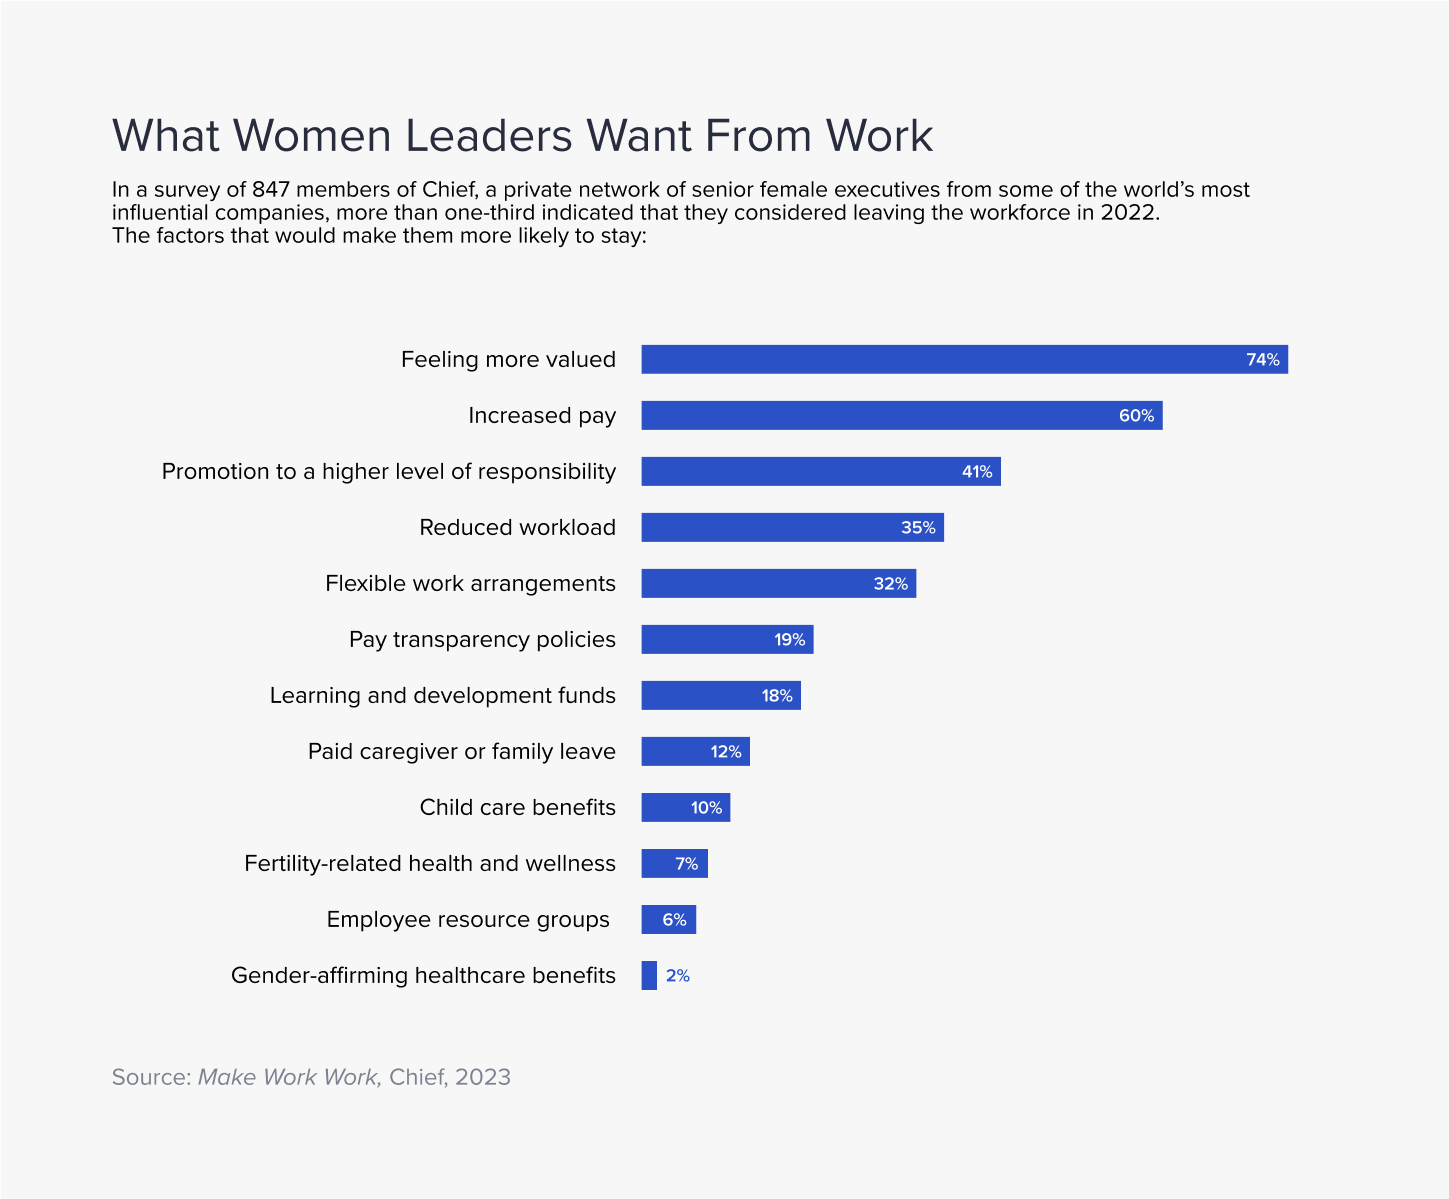 Factors that would make women leaders in business more likely to stay in the workforce include feeling valued and increased pay.